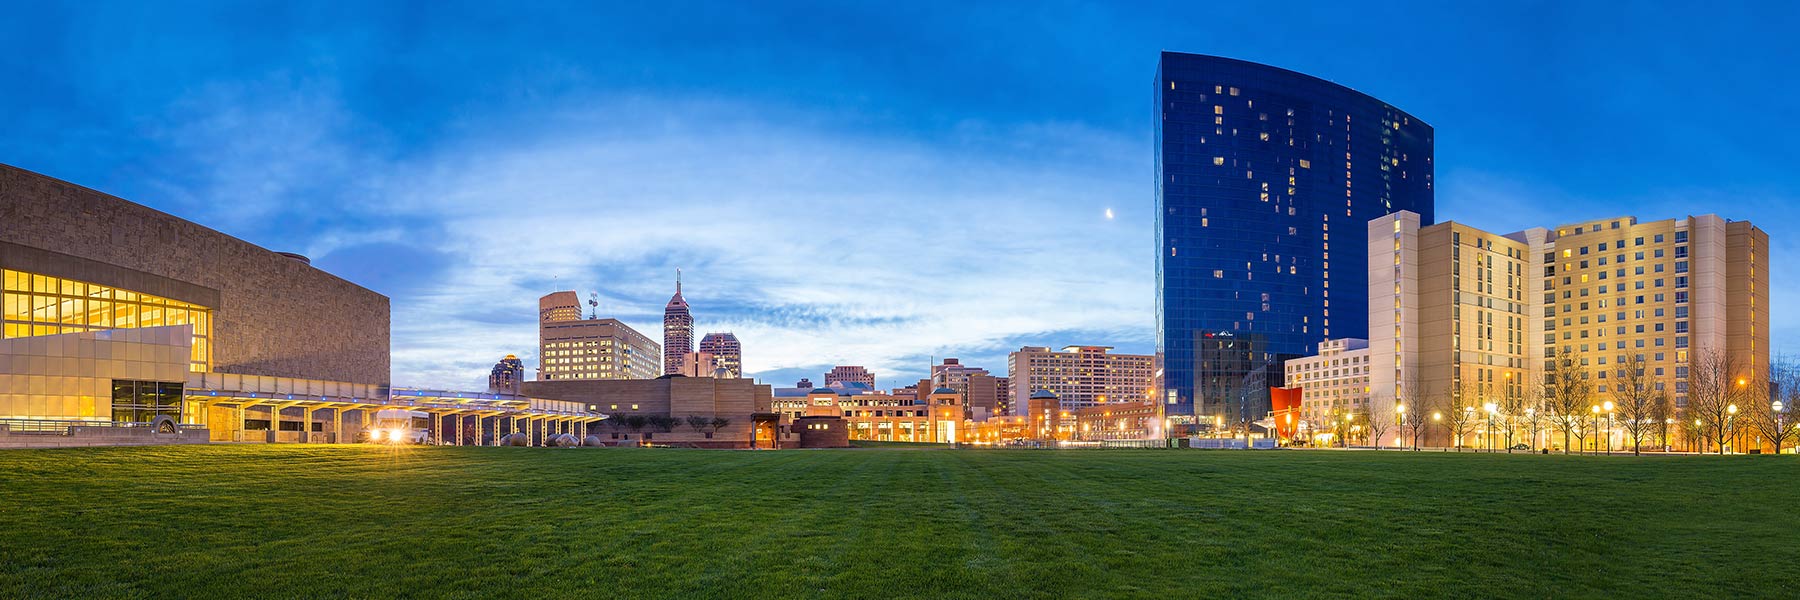 View looking across White River State Park toward the downtown Indianapolis skyline with the Indiana State Museum on the left and the JW Marriott hotel on the right 